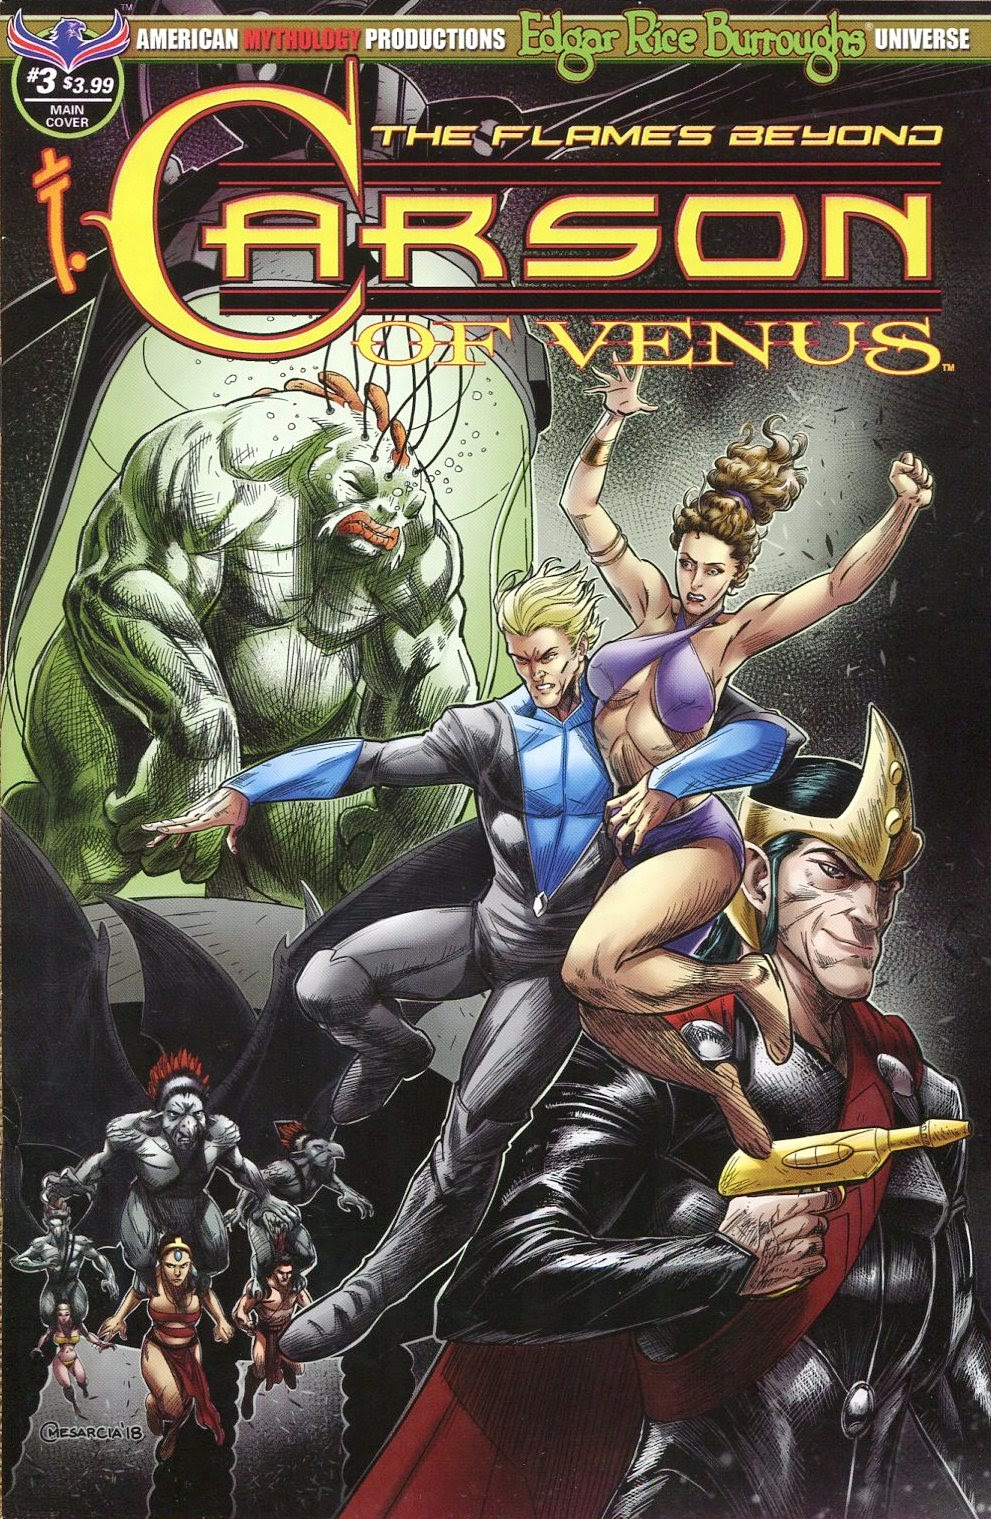 Read online Carson of Venus: The Flames Beyond comic -  Issue #3 - 1